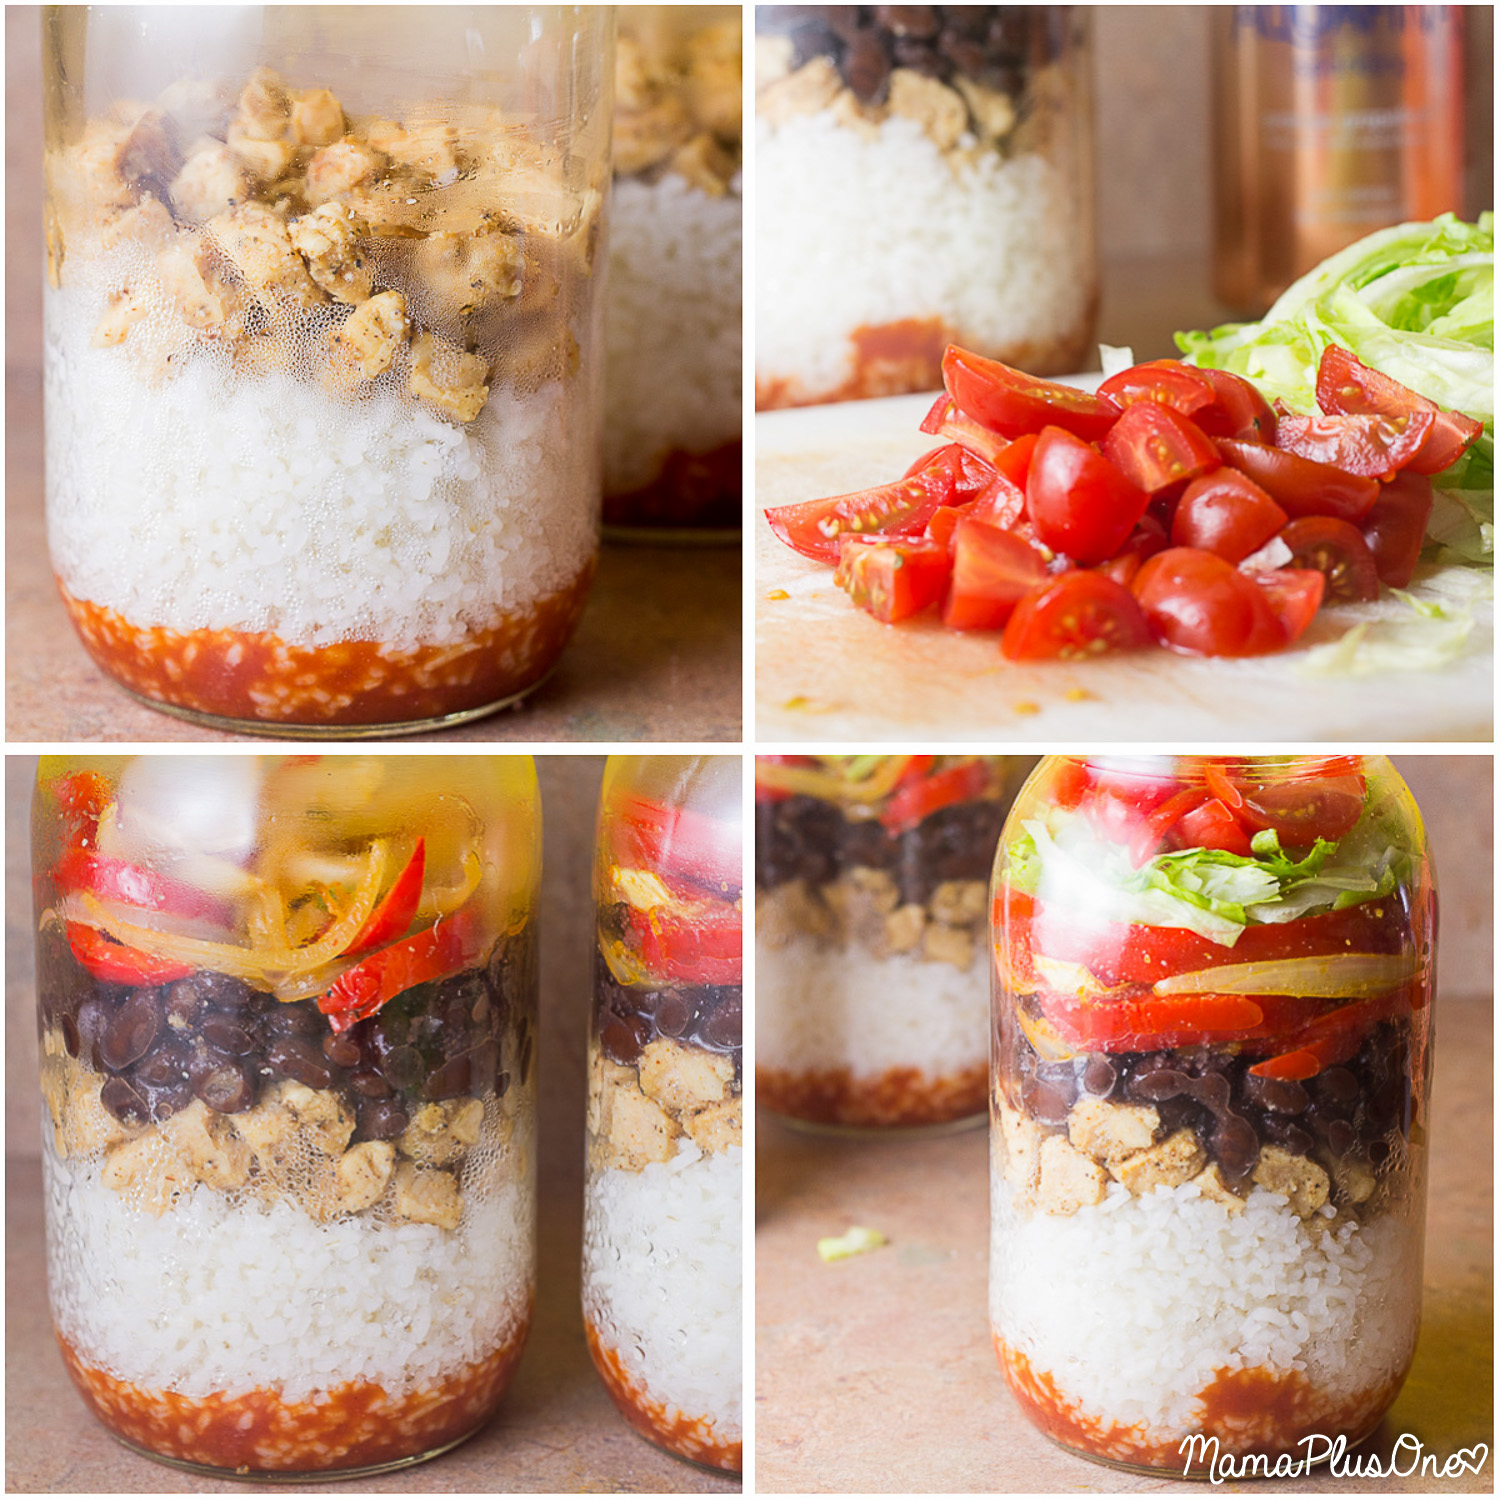 Pep up your park playdates. Instead of having boring crumbled crackers from the bottom of your hand bags, or squished PB&J, send the kids to the playground and enjoy these Fajita Burrito Bowls in a Jar with your BFF. Perfect for park playdates, and they pair great with #AquafinaSparkling [ad]